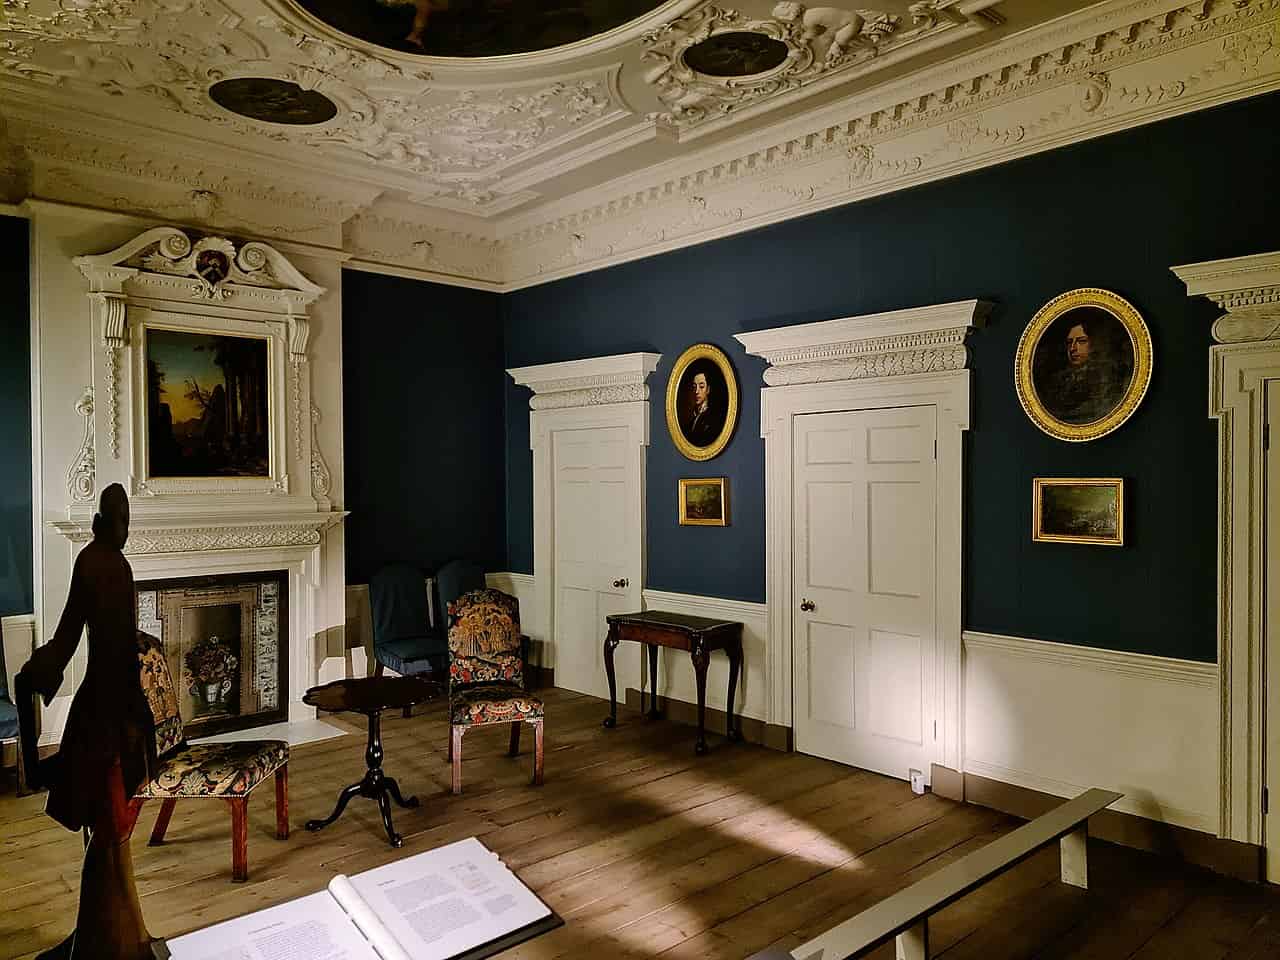 A period reception room from 1727-1732 from Henrietta Street